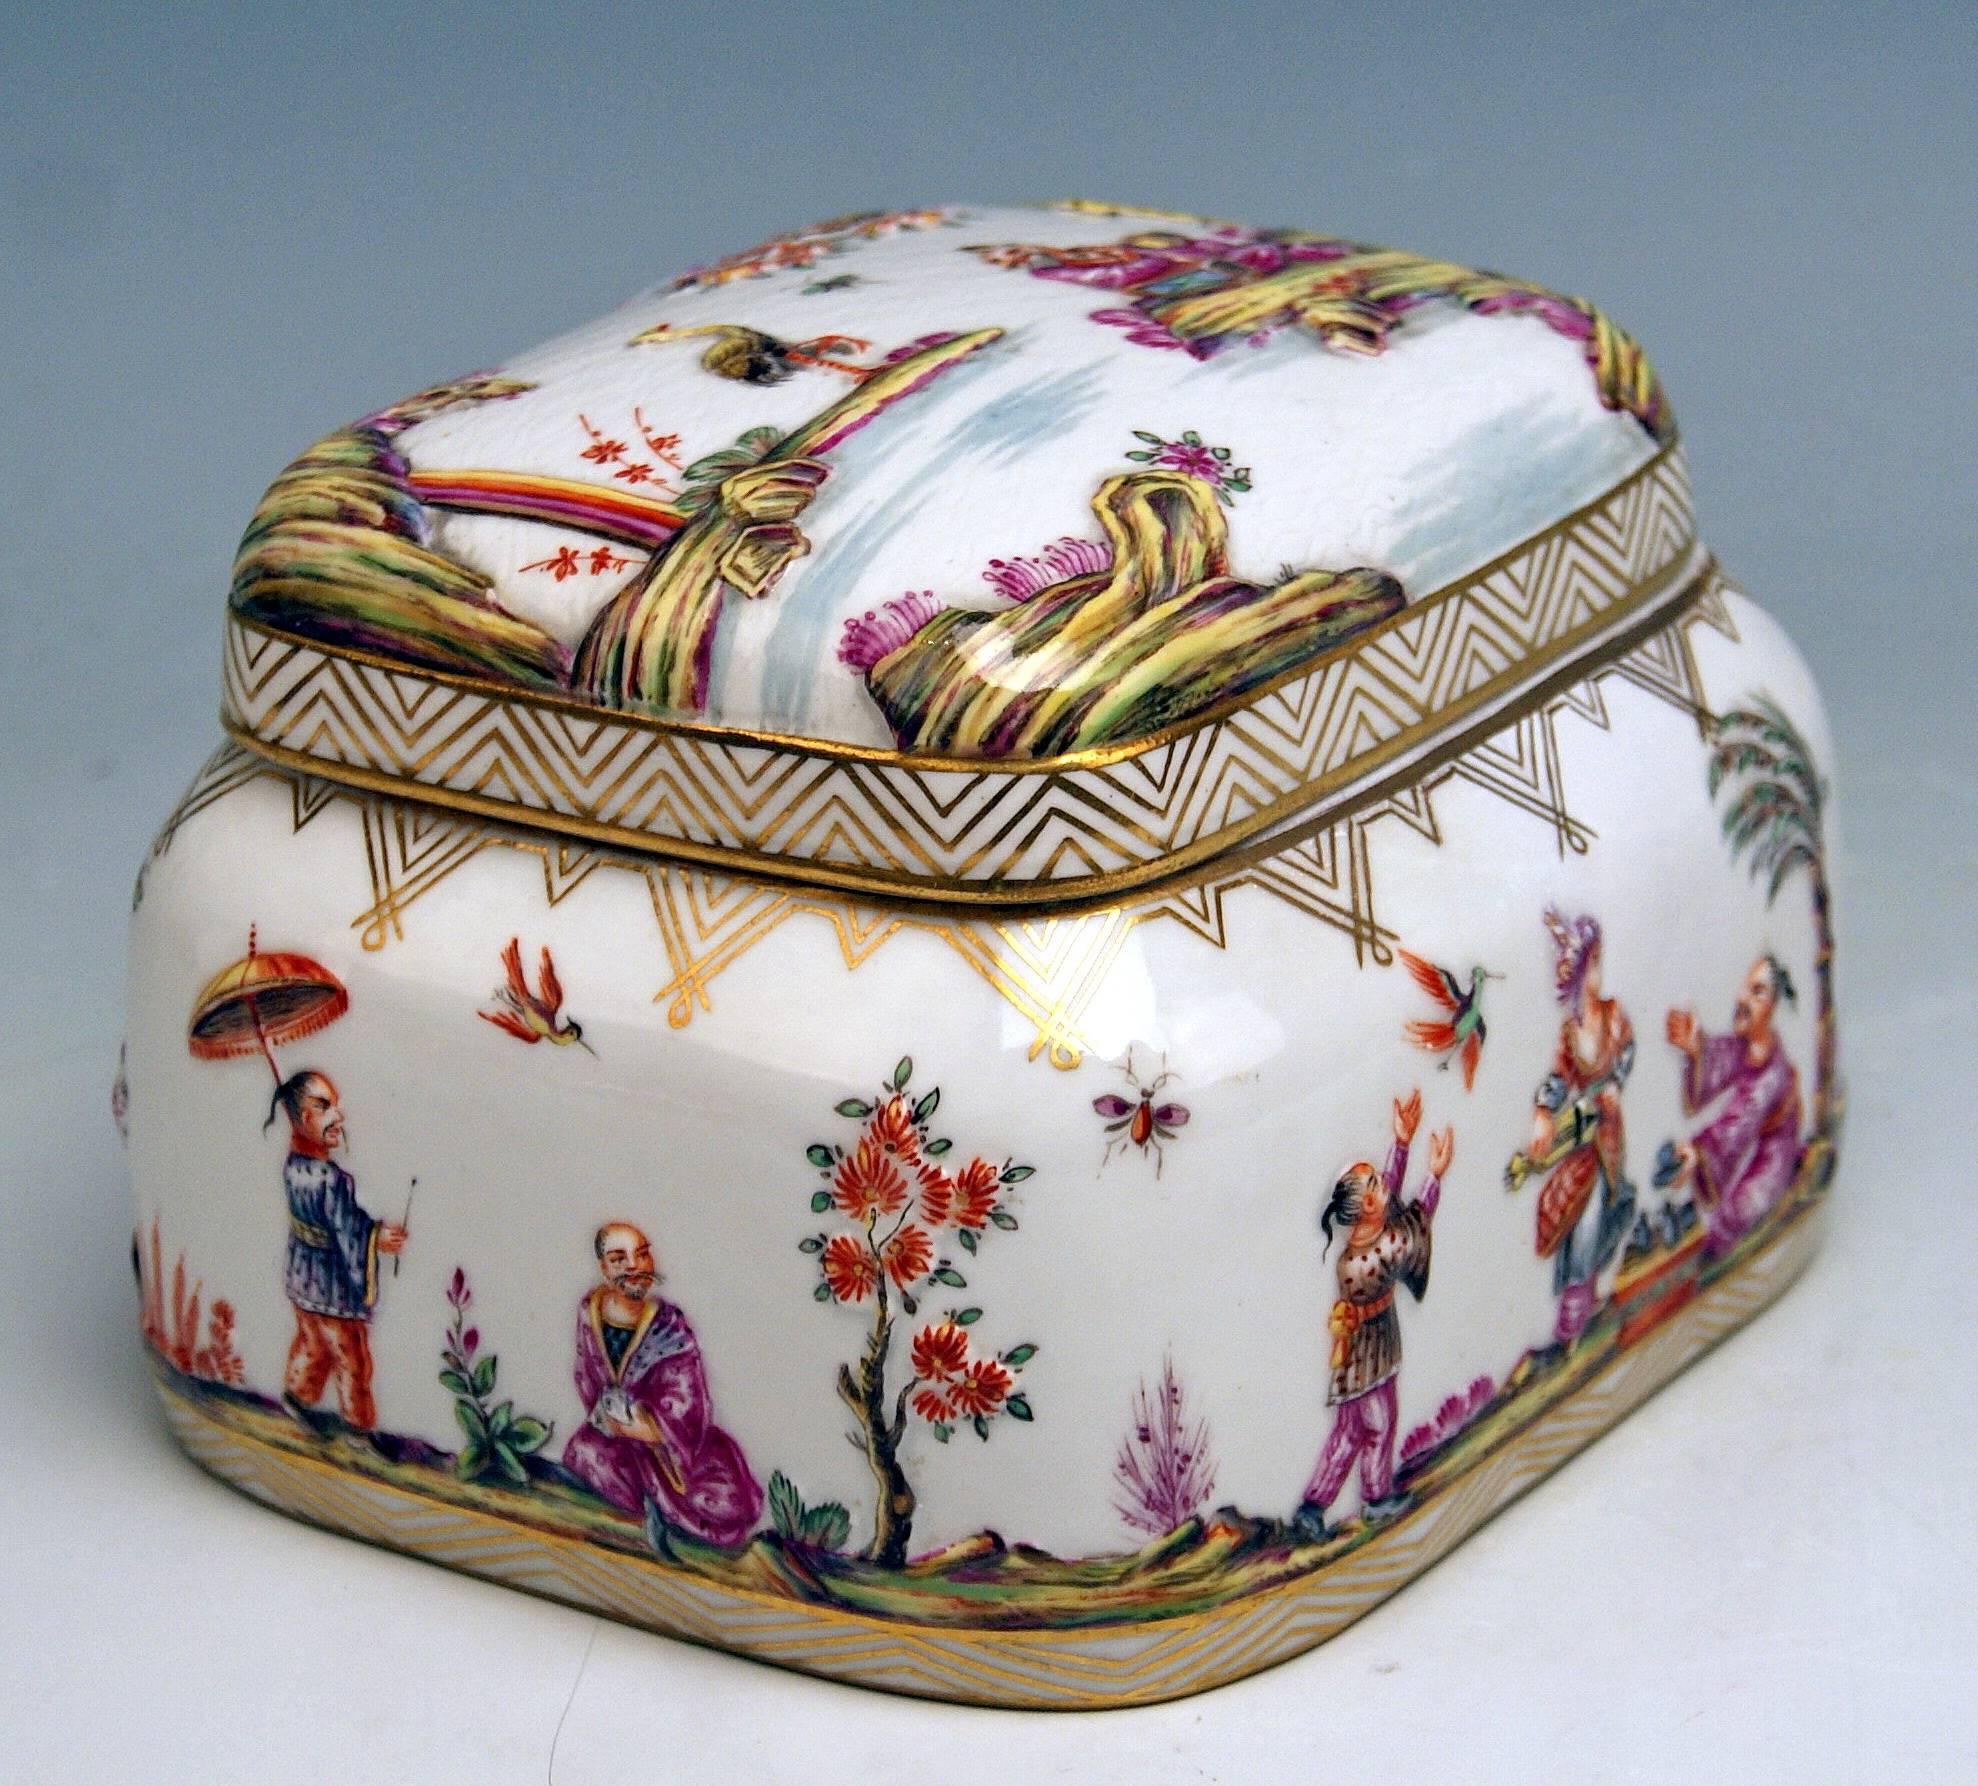 Meissen gorgeous lidded box with multicolored decorations (Chinoiseries) of relief type
 Measures:
height: 10.0 cm (3.93 inches) 
width: 14.0 cm (5.51 inches) 
depth: 11.5 cm (4.52 inches) 

Manufactory: Meissen
Hallmarked: Blue Meissen Sword